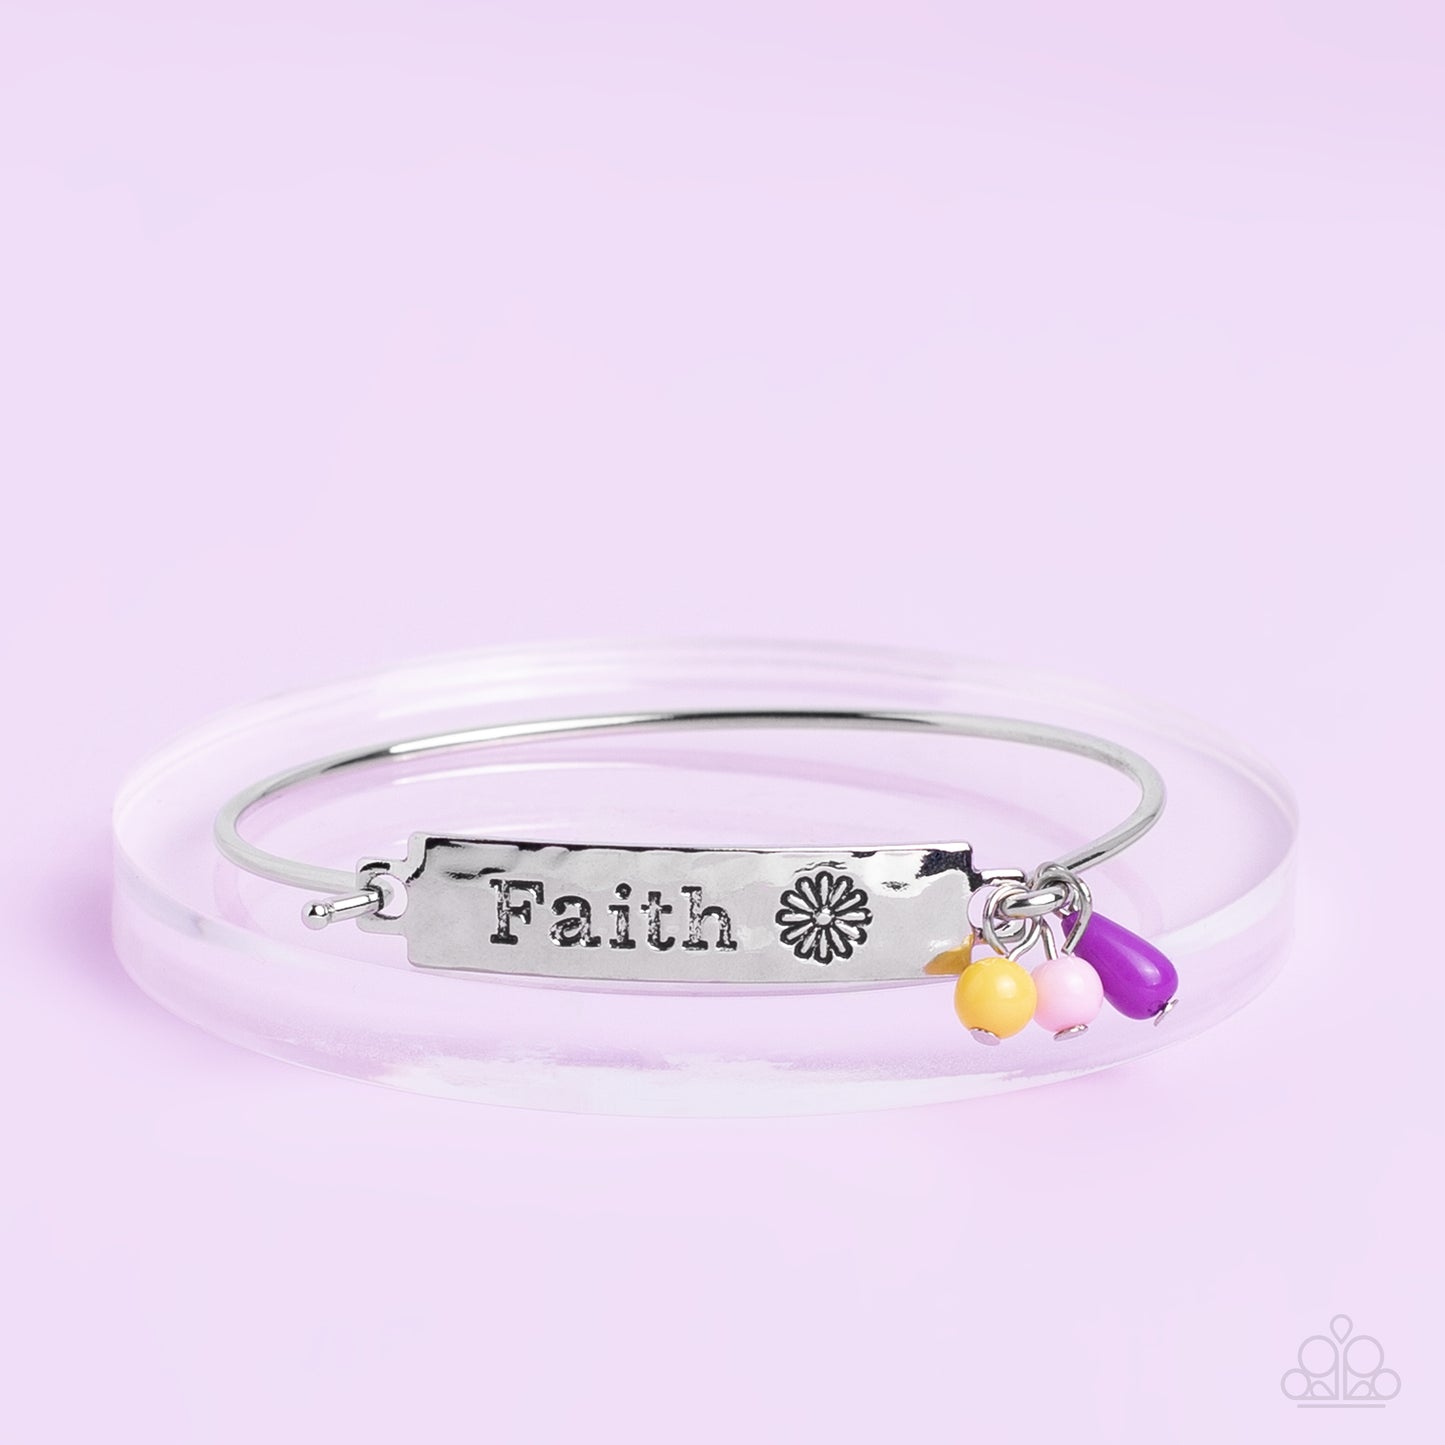 Flirting with Faith Purple Bracelet - Paparazzi Accessories  The word "Faith" and a whimsical daisy silhouette are stamped across a thick hammered plate of silver. Three acrylic beads in the shades of Primrose, purple, and baby pink add a dash of color to this inspirational piece, gathering together where the plate attaches to a skinny silver cuff. Features a hook and eye closure.  Sold as one individual bracelet.